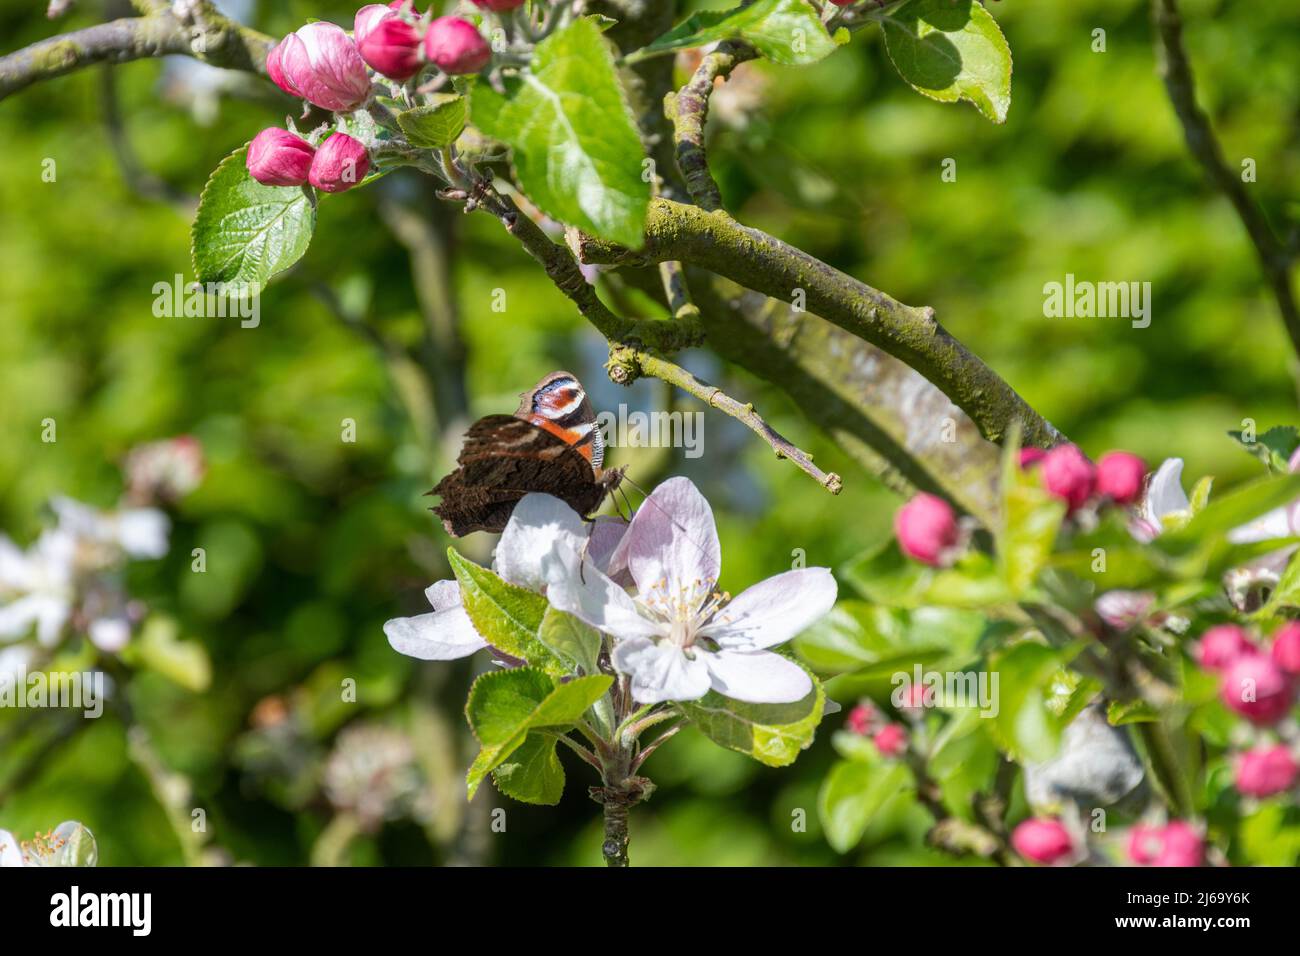 Peacock butterfly (Aglais io) nectaring on apple blossom during April or spring, England, UK Stock Photo